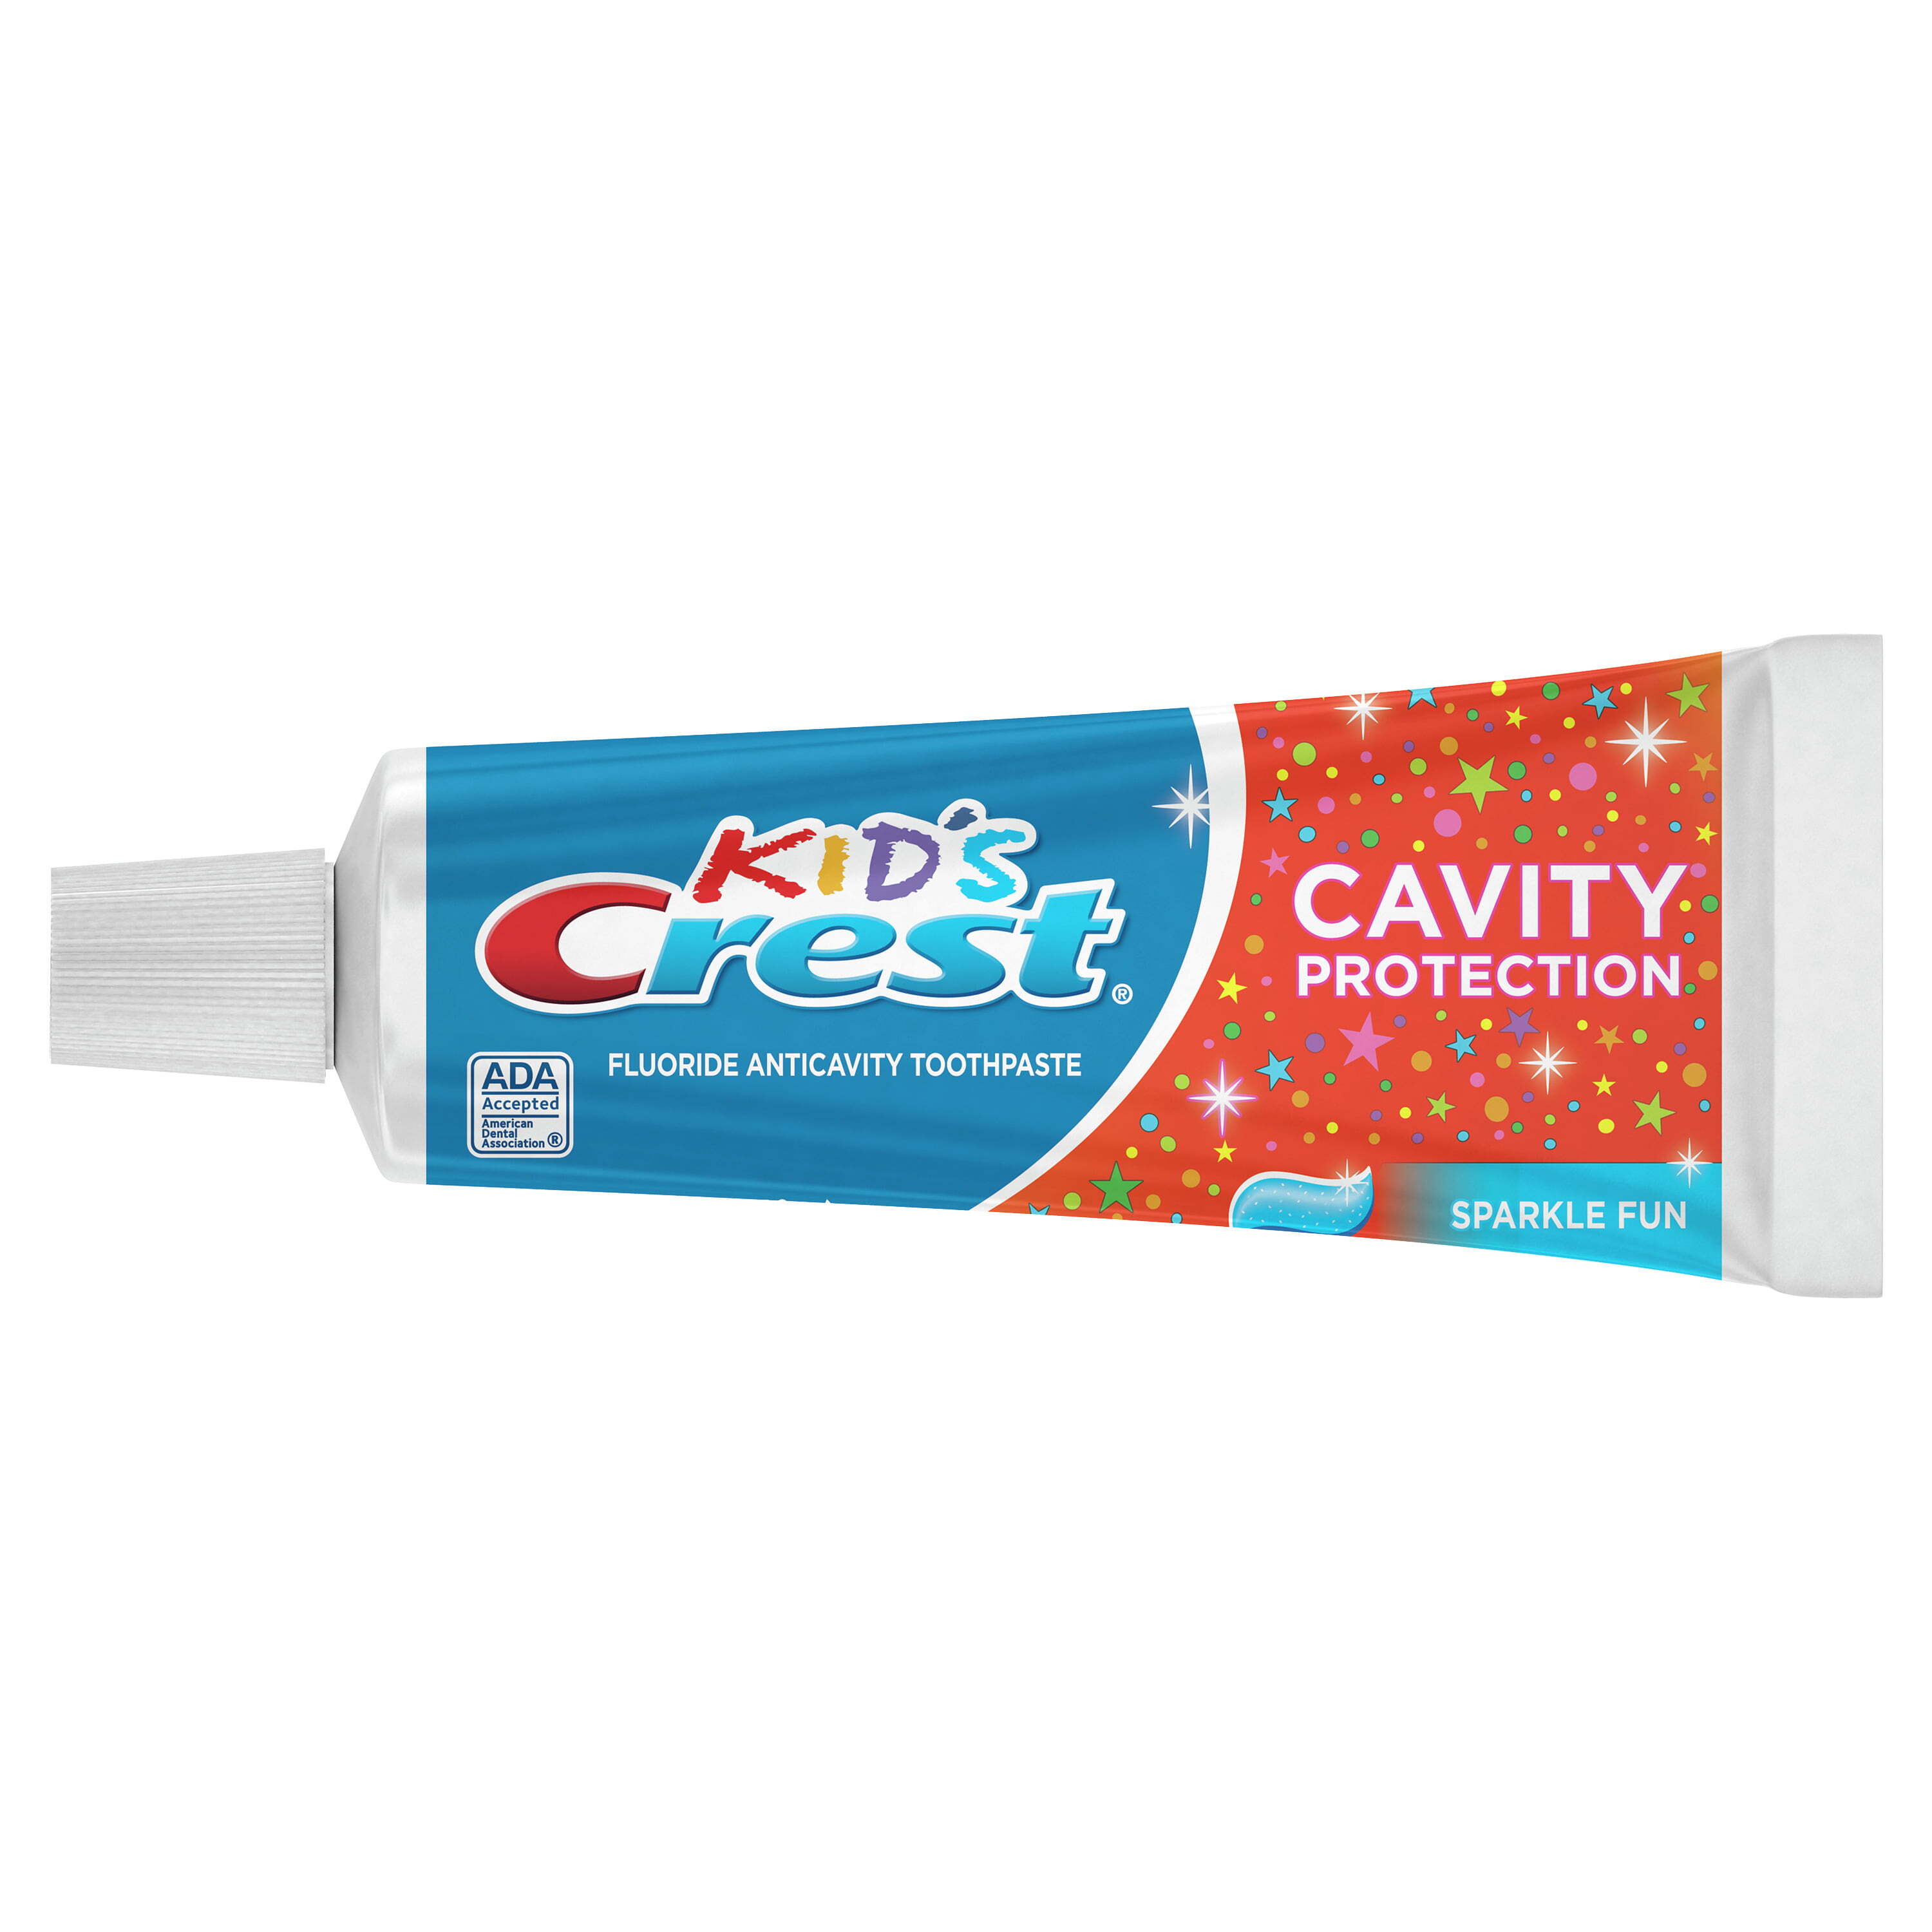 Crest Kids Cavity Protection Toothpaste, Sparkle Fun Flavor, 4.6 oz 3 Pack - image 3 of 8